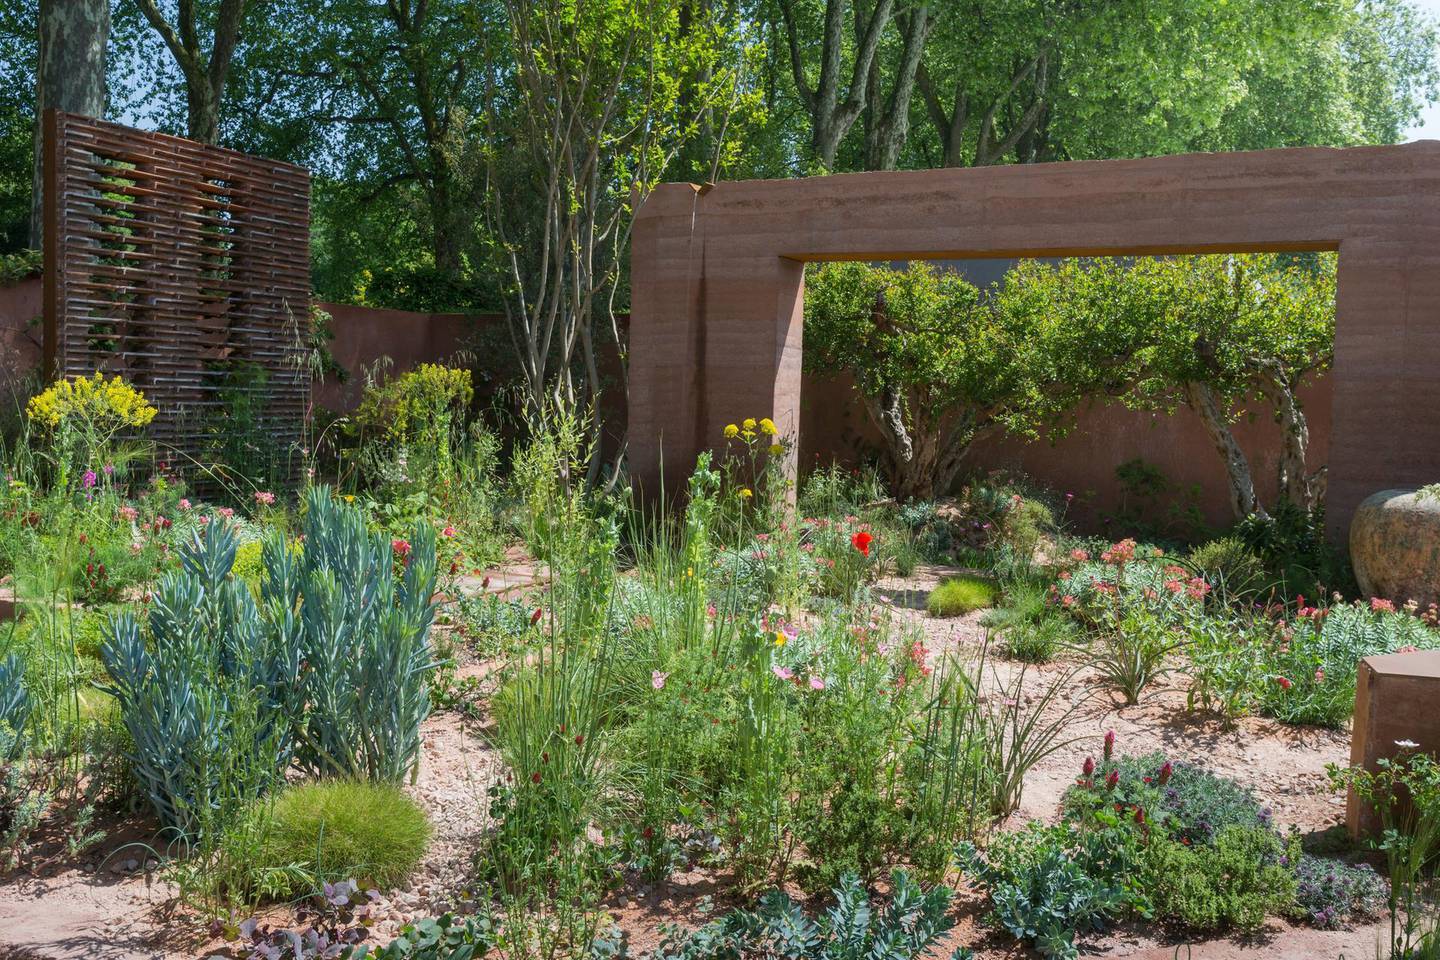 The M&G Garden. Designed by: Sarah Price. Sponsored by: M&G Investments. RHS Chelsea Flower Show 2018. Stand no.320